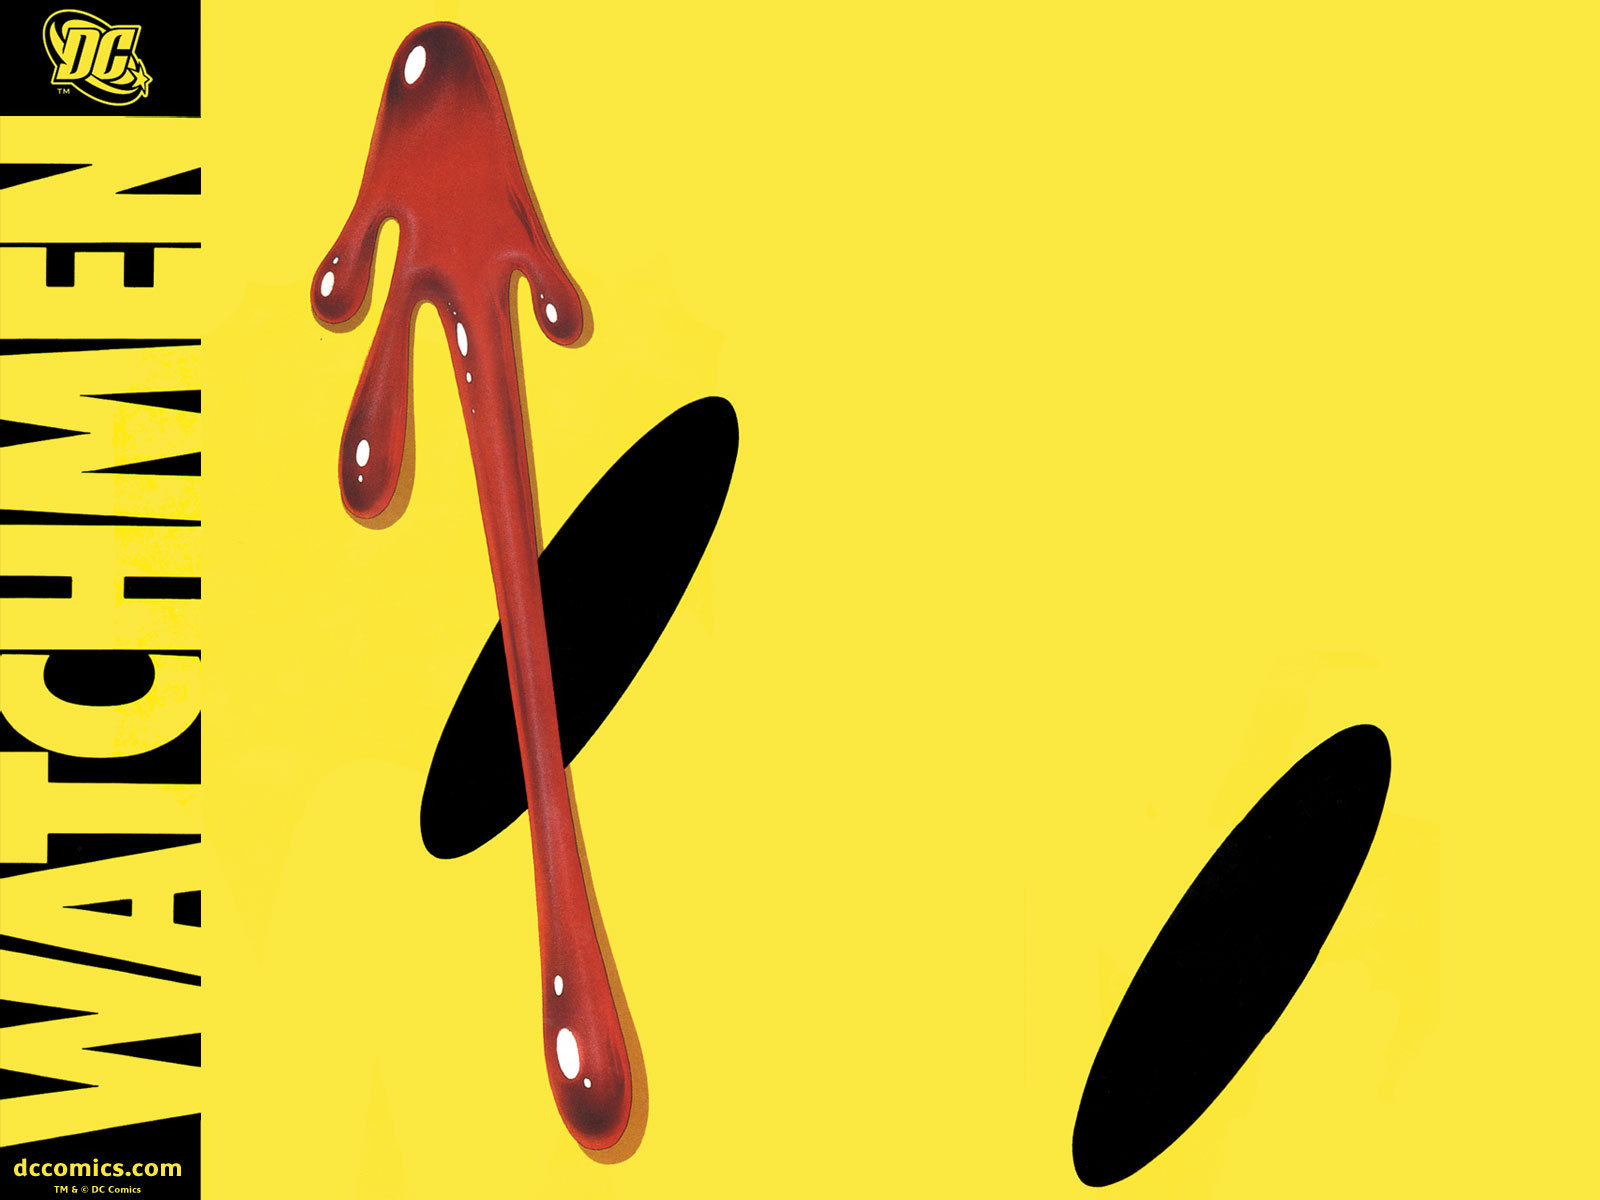 The cover of Watchmen #1 featuring the eyes of a smiley face and a splat of blood.